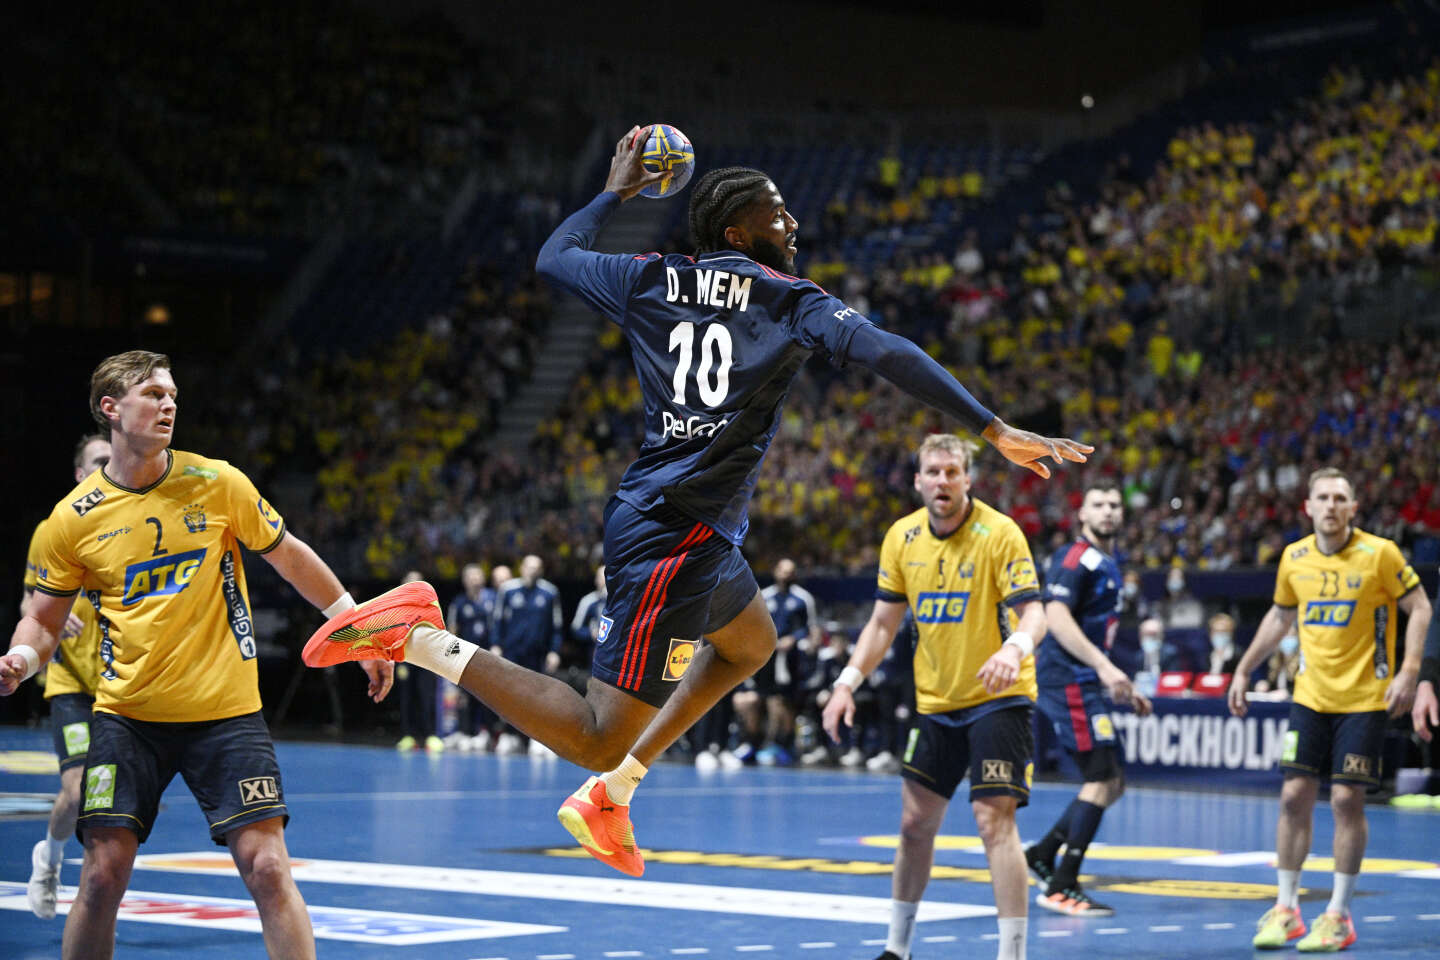 France takes revenge on Sweden and finds Denmark in the final